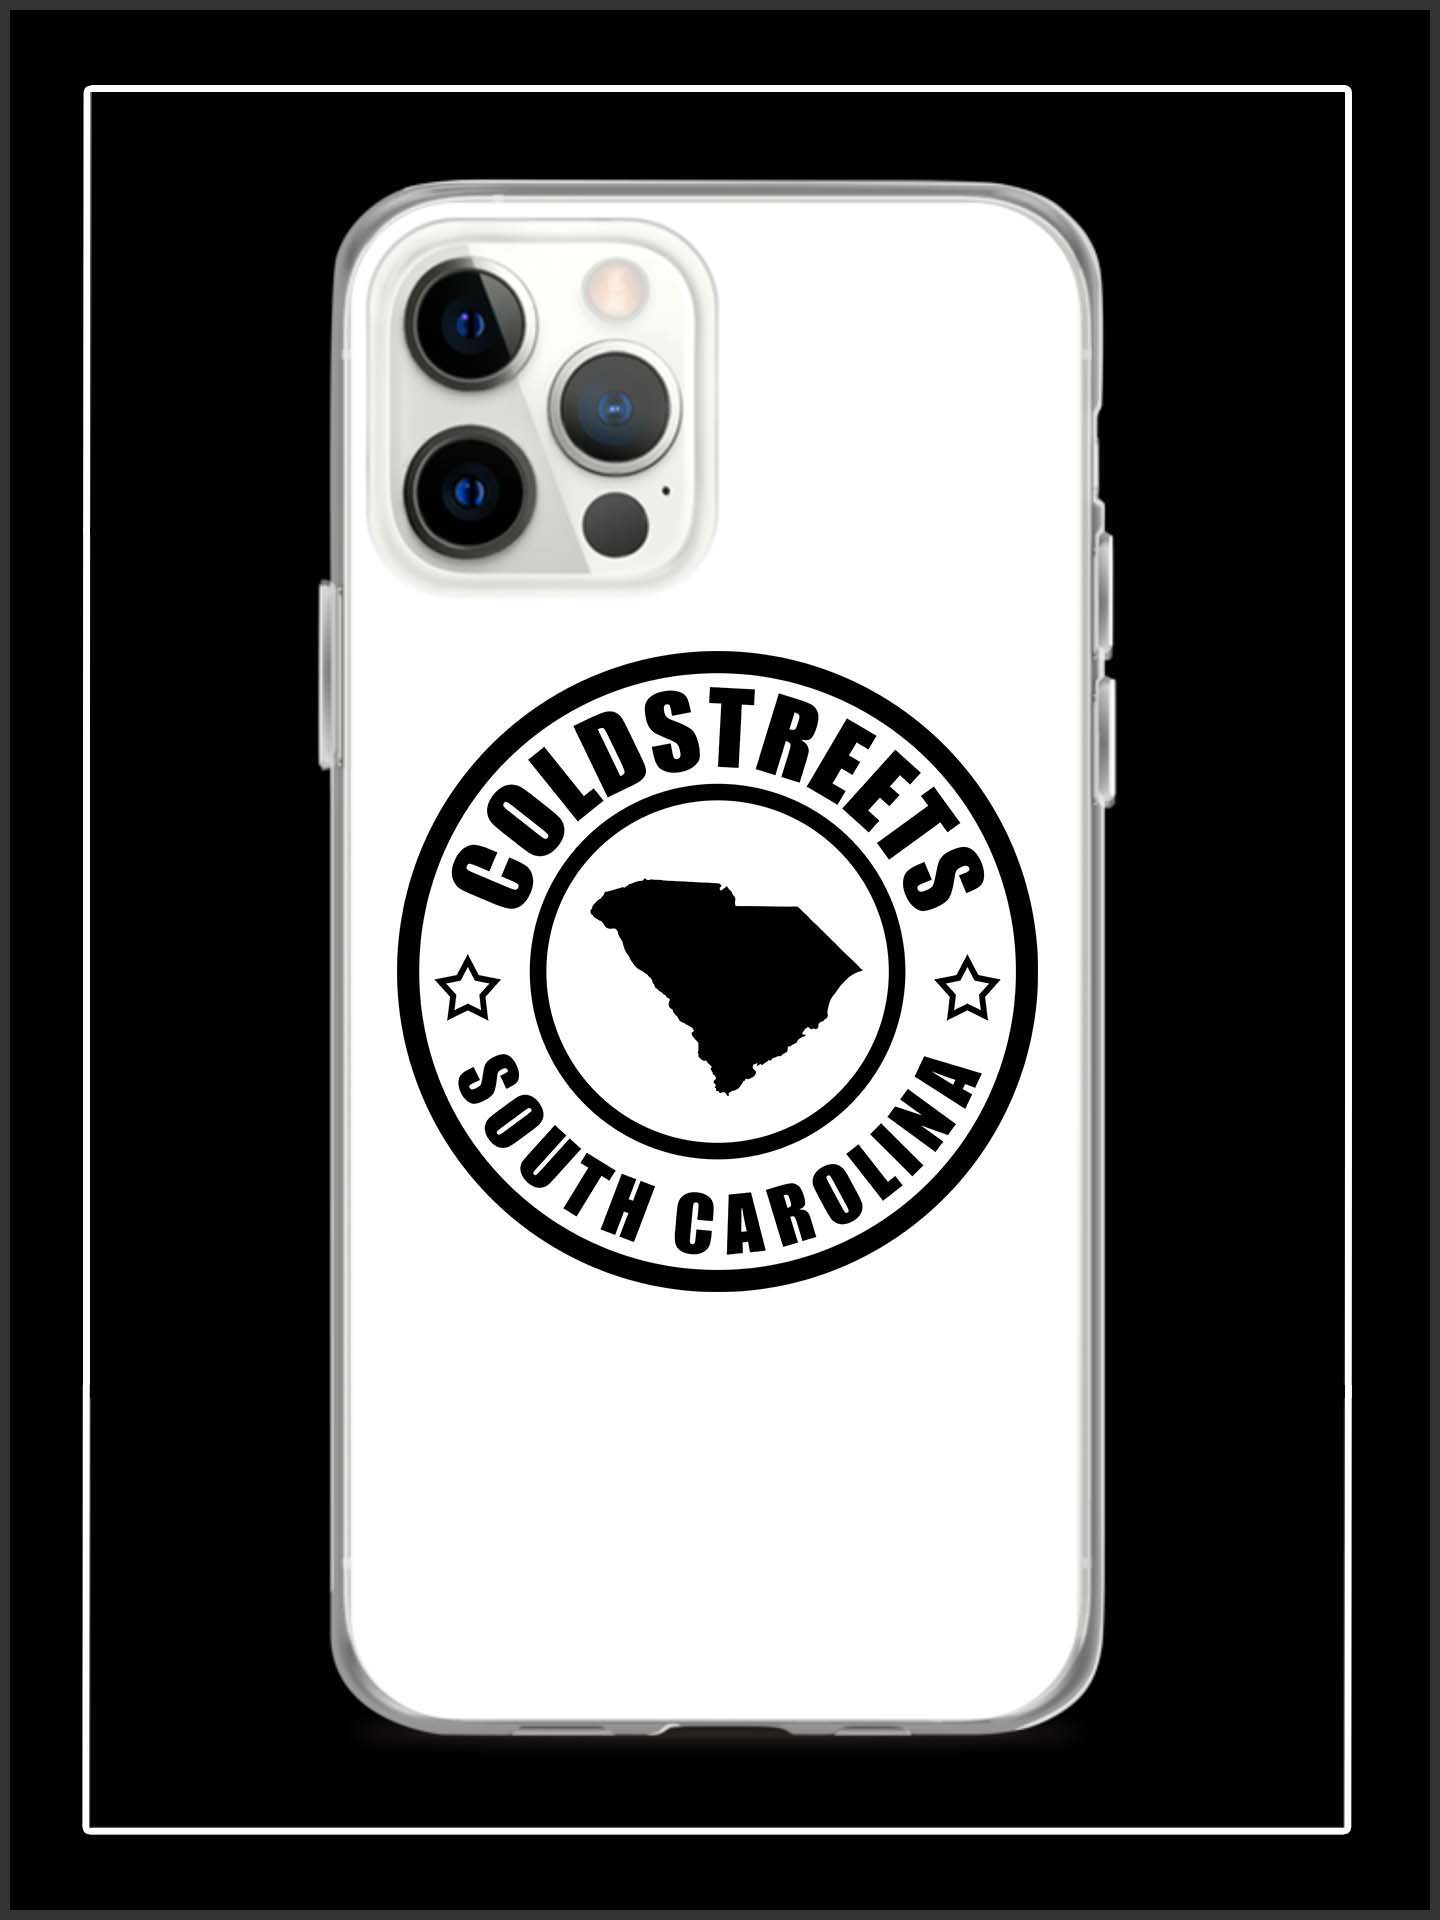 Cold Streets South Carolina iPhone Cases